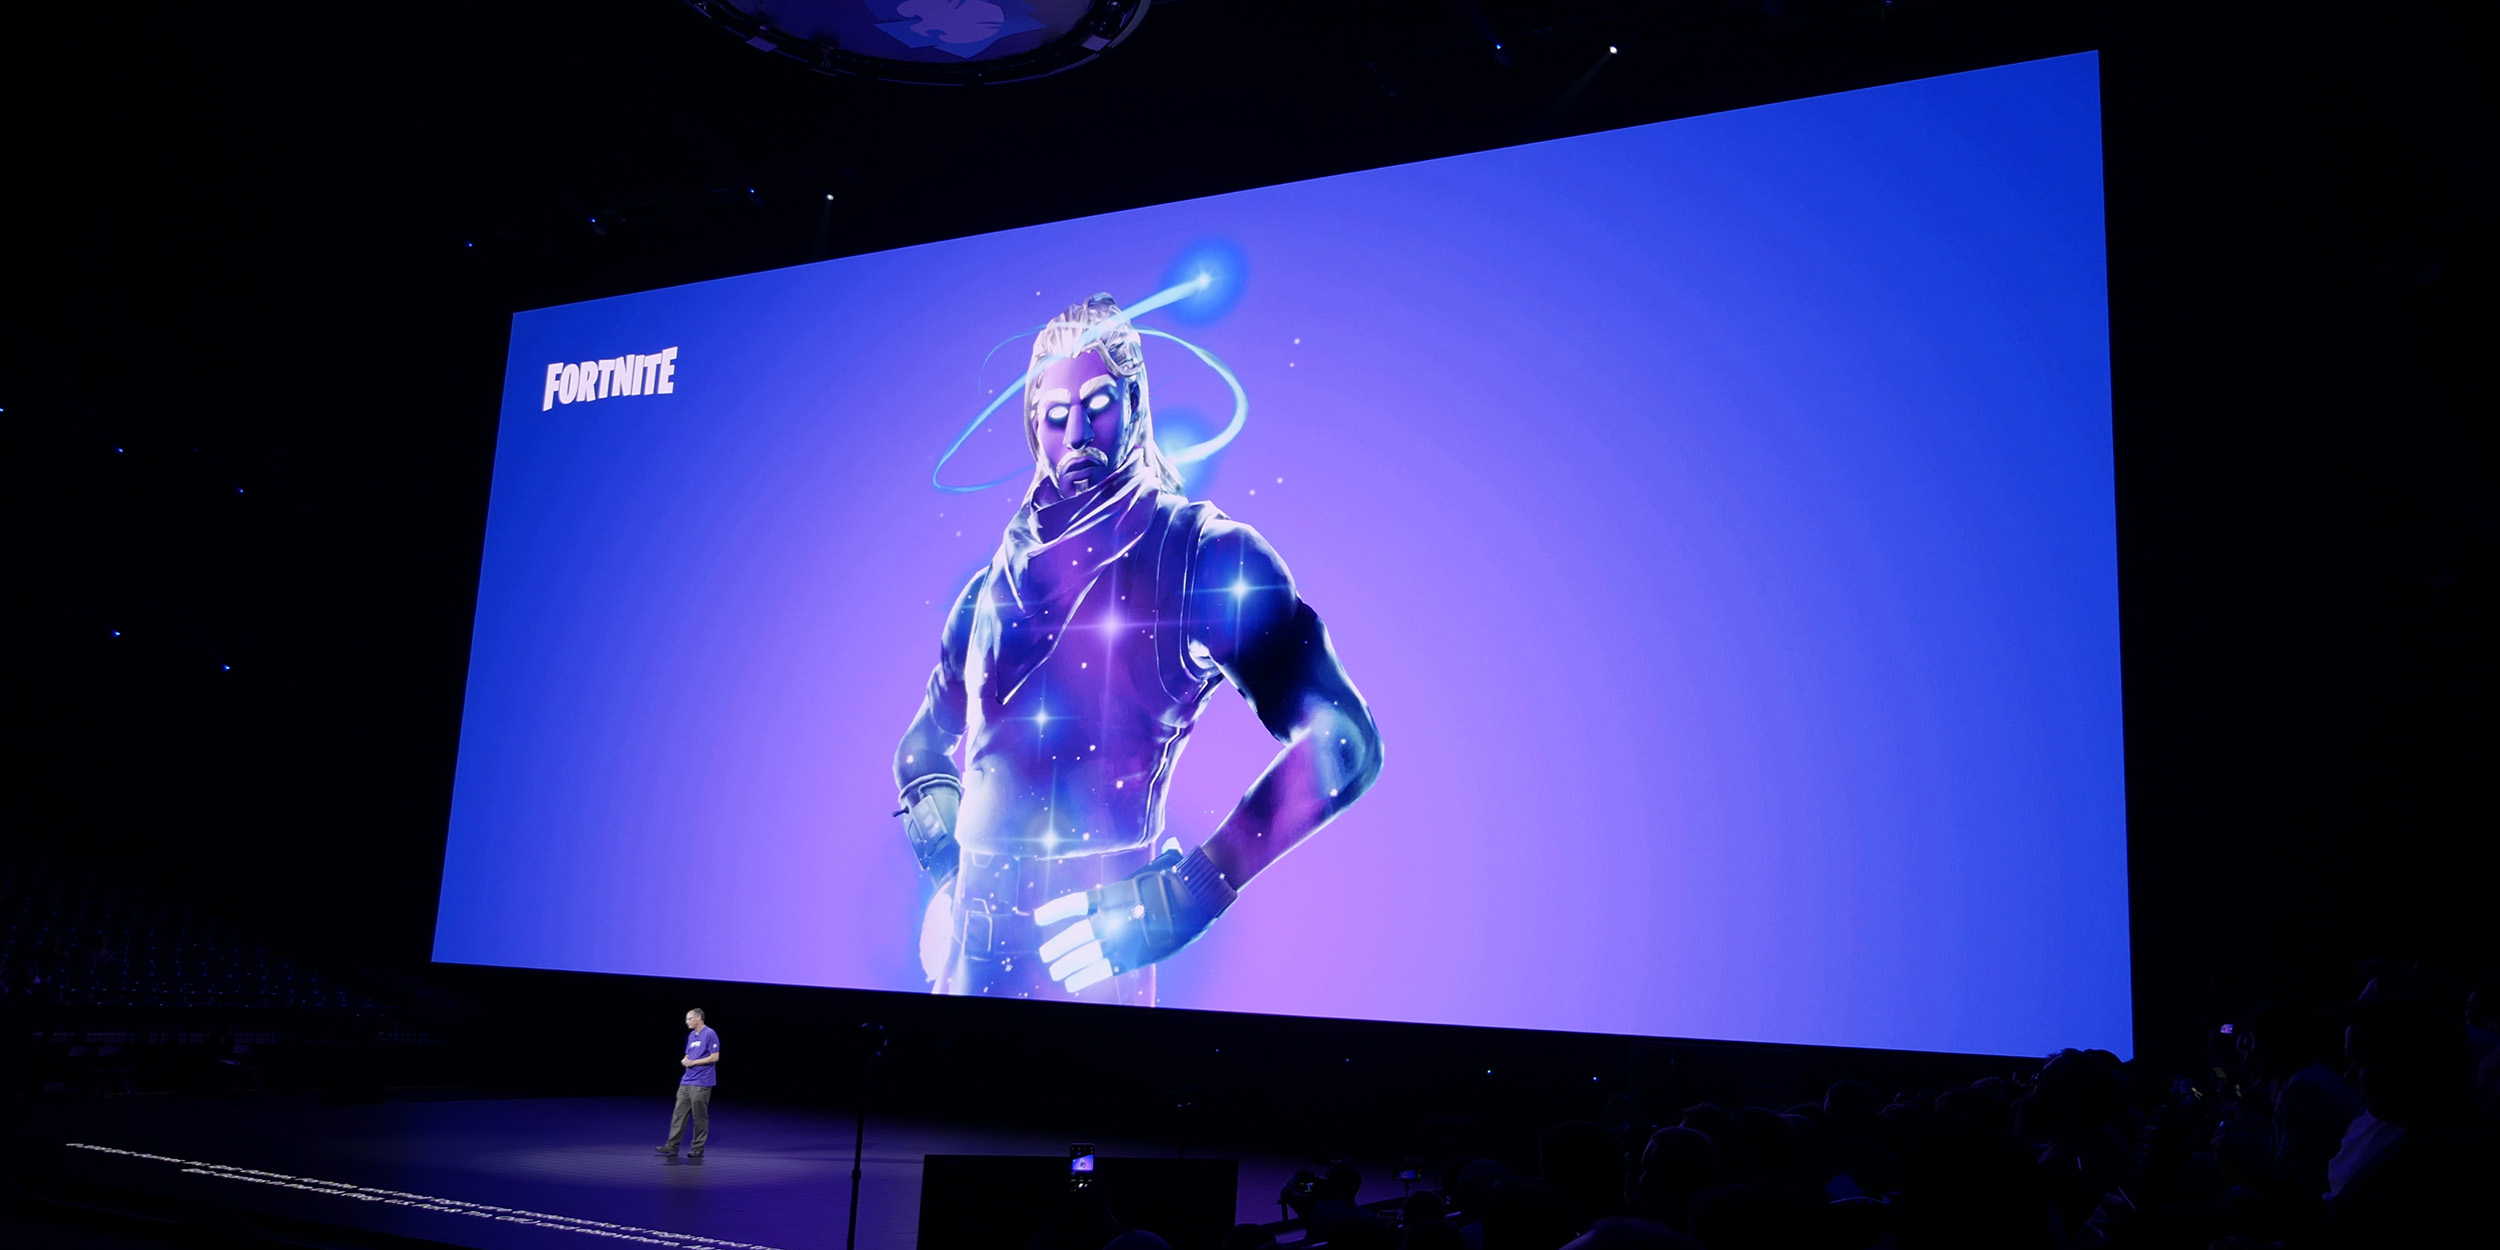 Samsung Will Let You Play Fortnite W Ninja In New Contest 9to5google - along with that contest samsung is also opening up another fortnite bonus for galaxy note 9